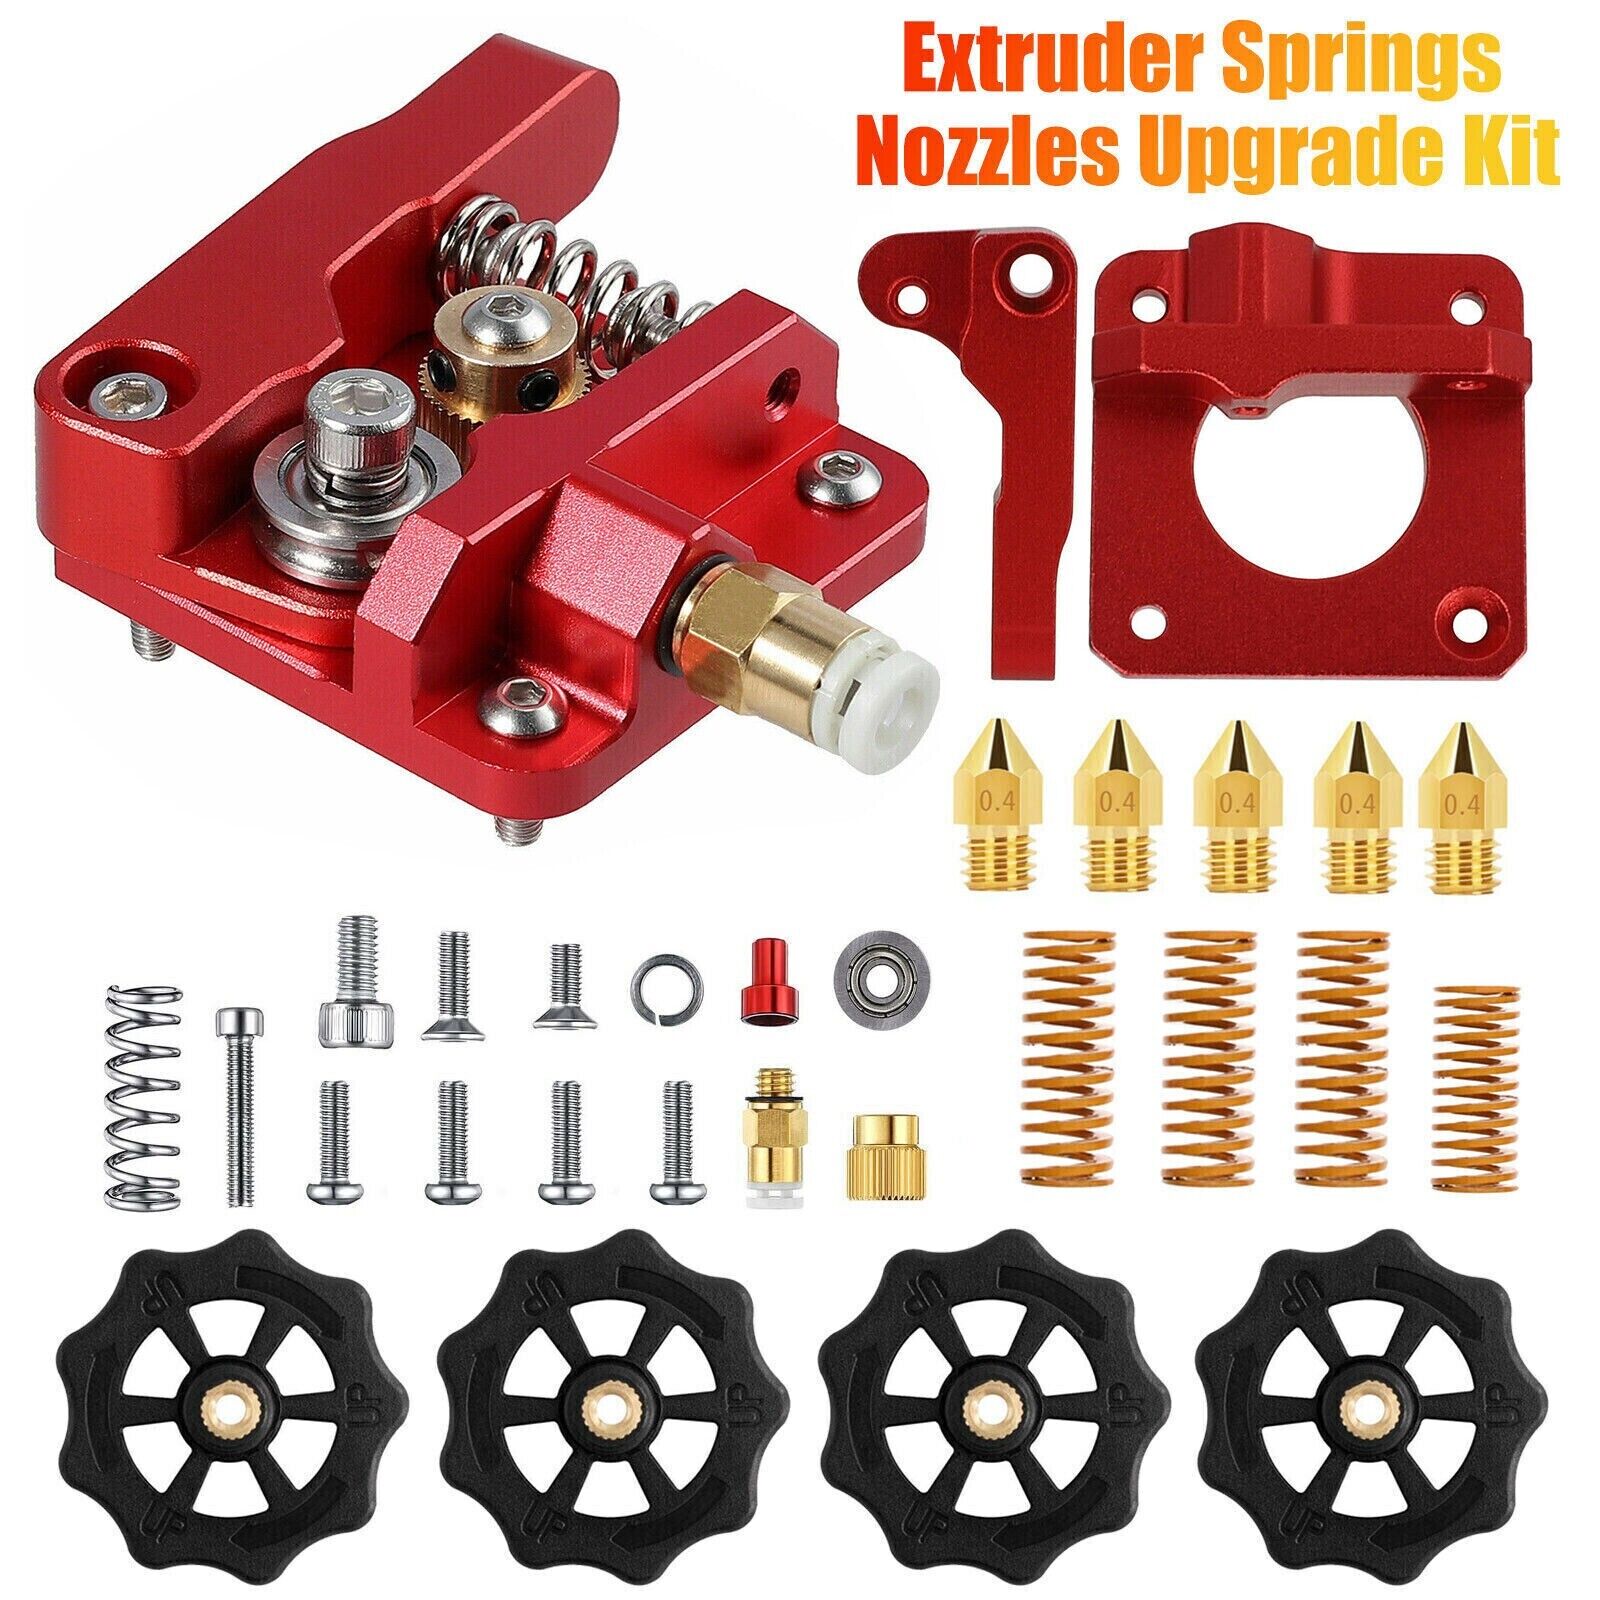 MK8 3D Printer Extruder Springs Nozzles Upgrade Kit for Creality Ender 3/3 Pro/5